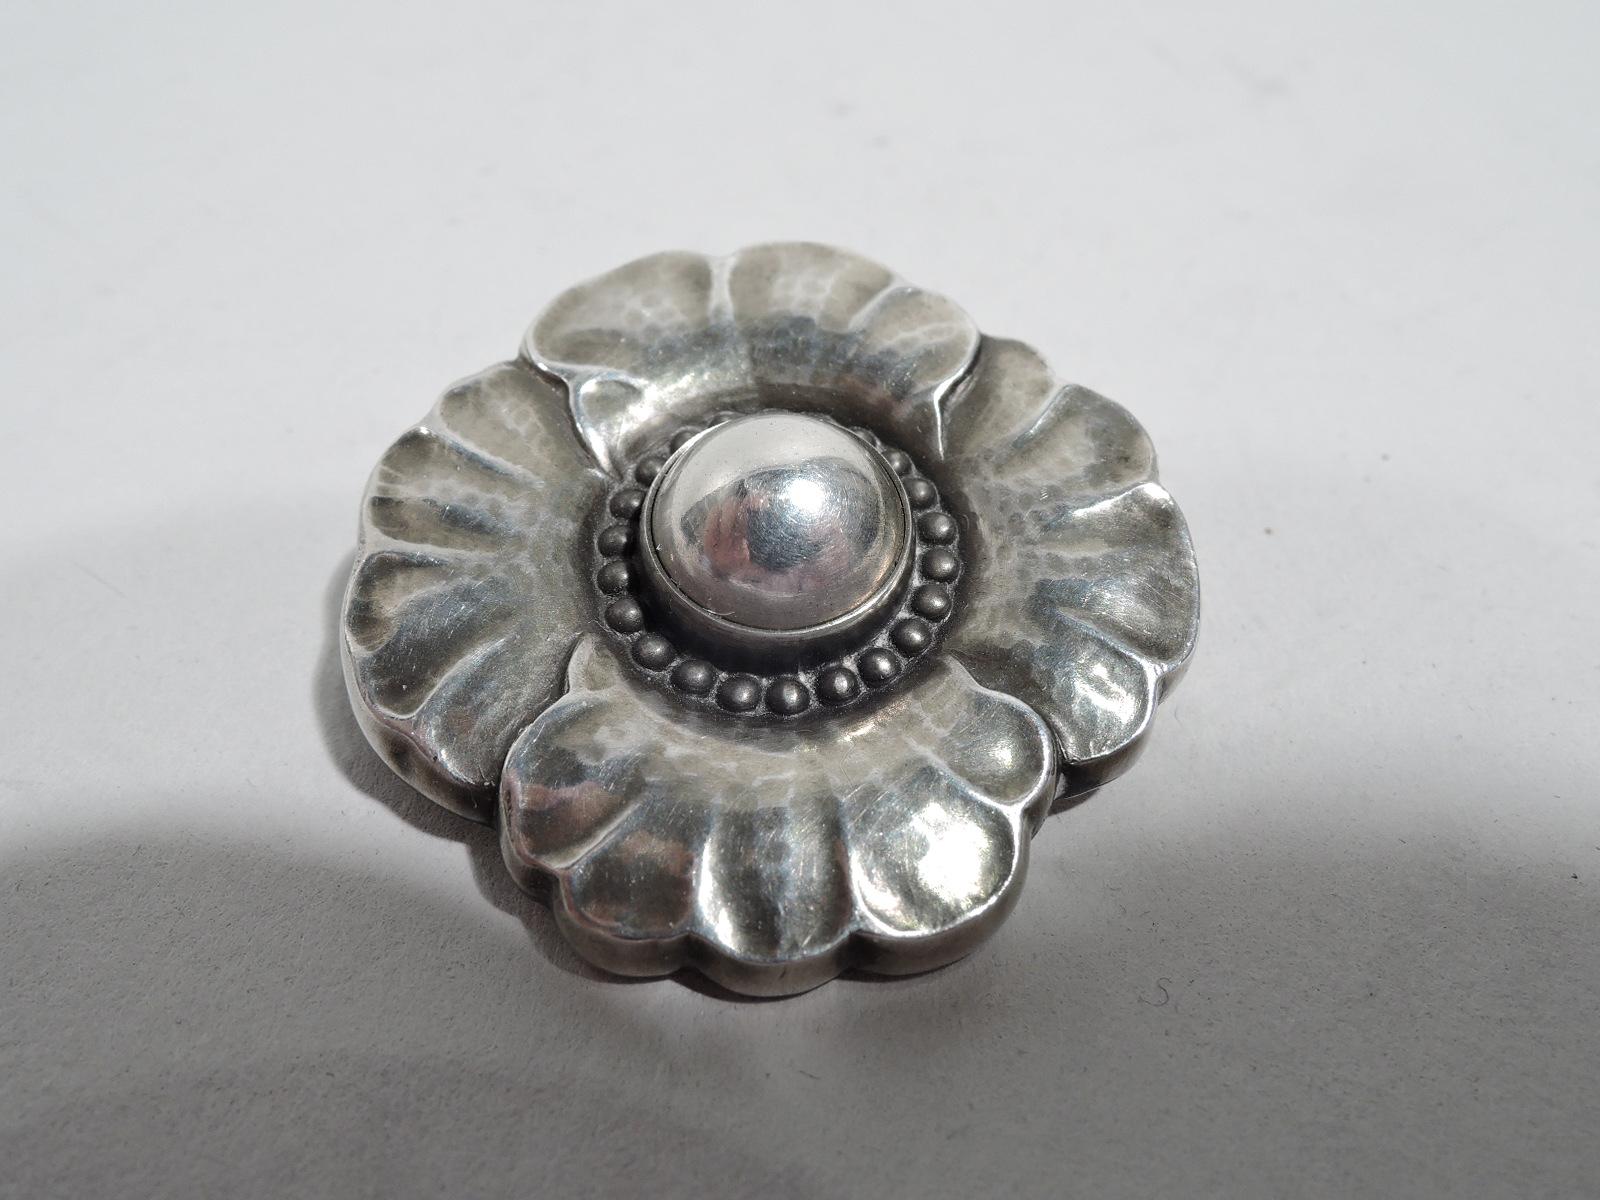 Art Nouveau sterling silver flower brooch. Made by Georg Jensen in Copenhagen. Beaded cabochon center and irregularly scalloped hand-hammered petals. The all-silver version of the master’s design. Cited in: Drucker. Georg Jensen, 1997, p. 168. Fully